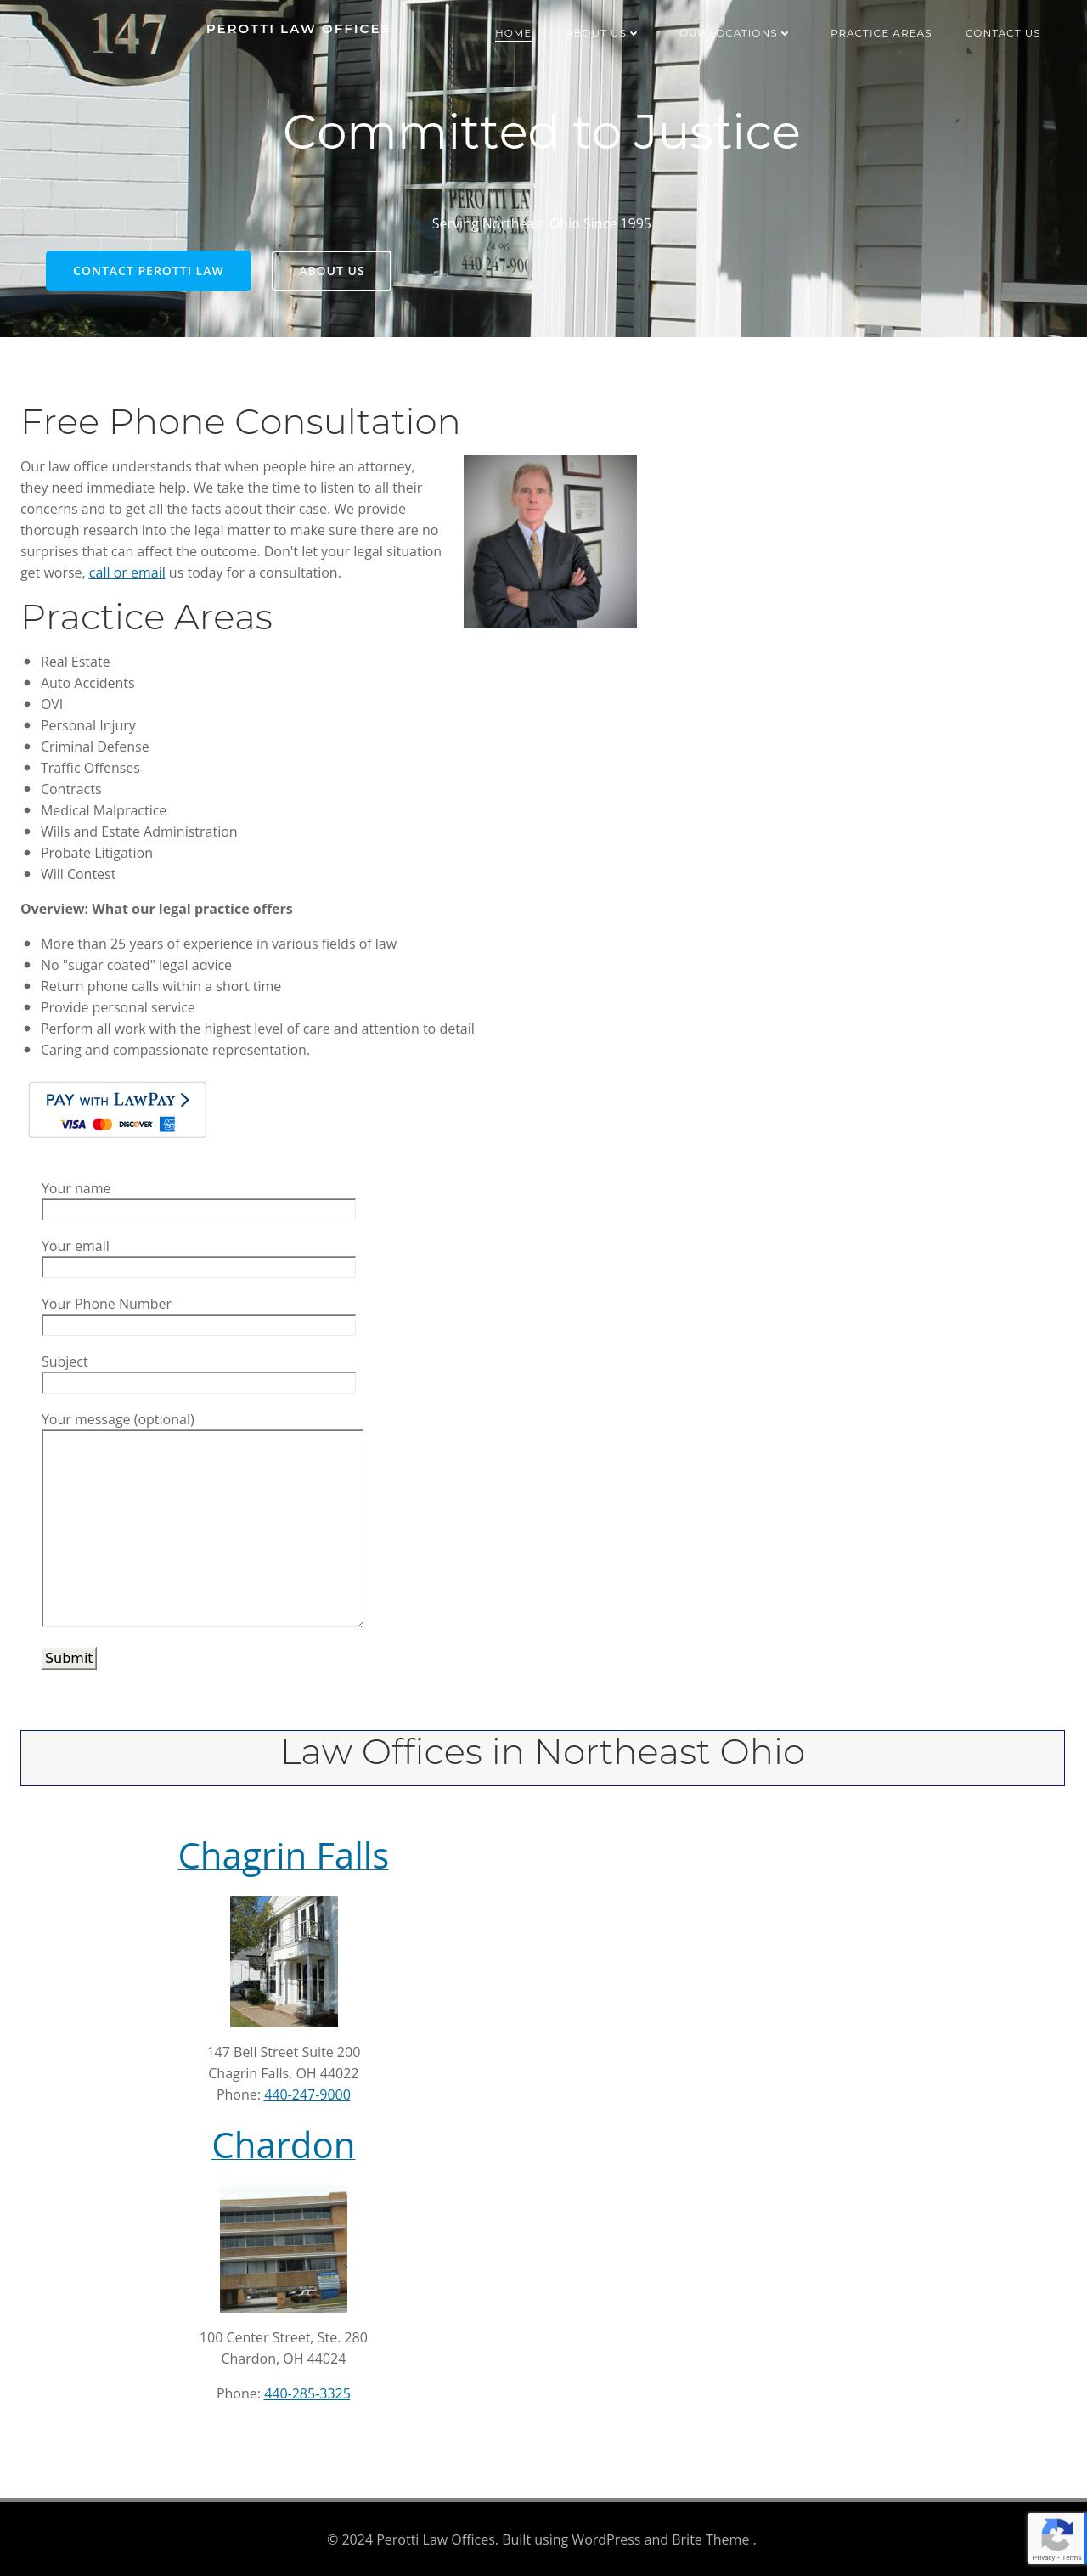 The Law Offices of Thomas I. Perotti - Cleveland OH Lawyers